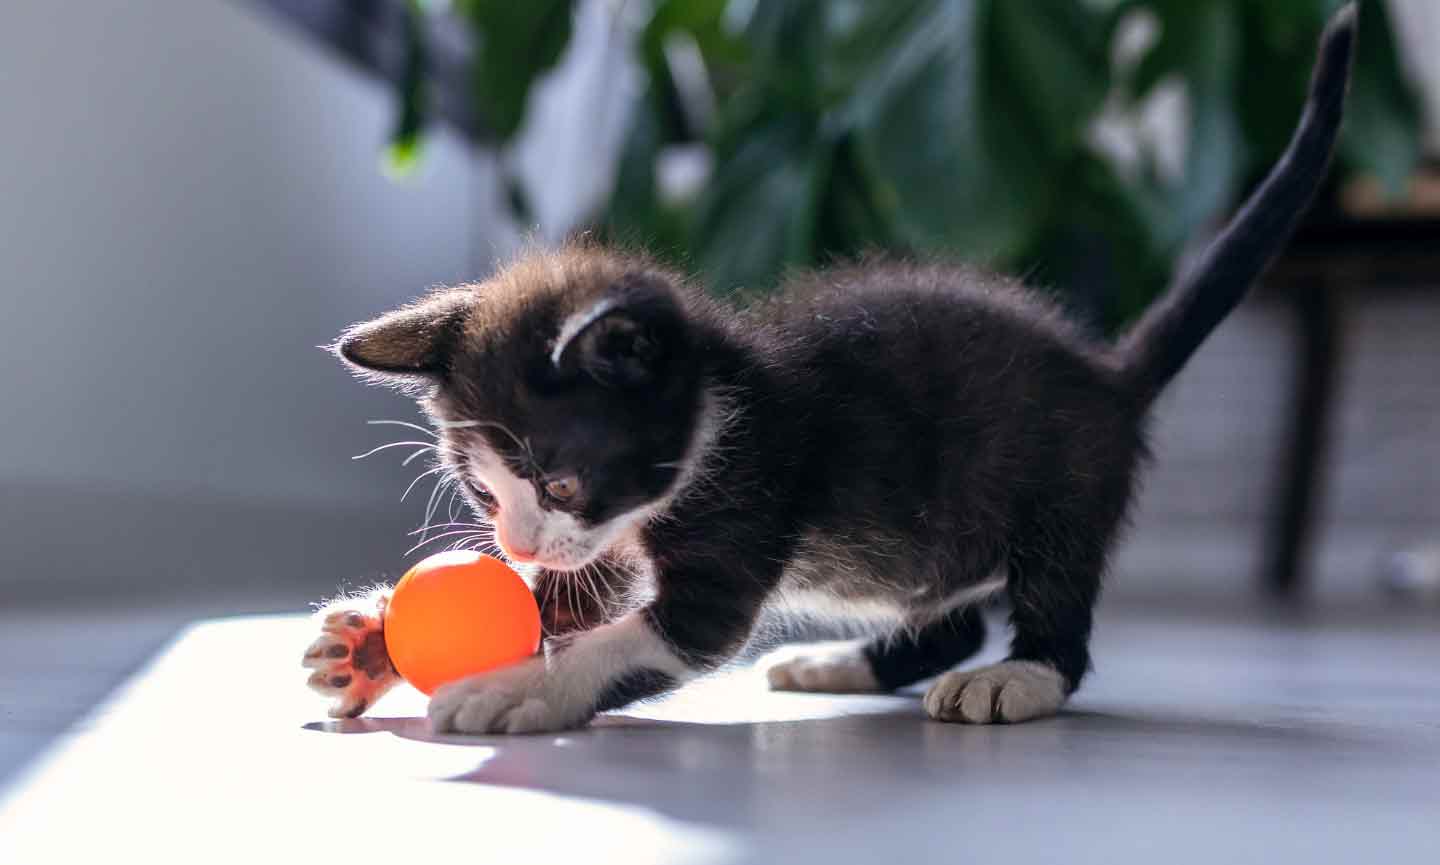 A kitten playing with a ball